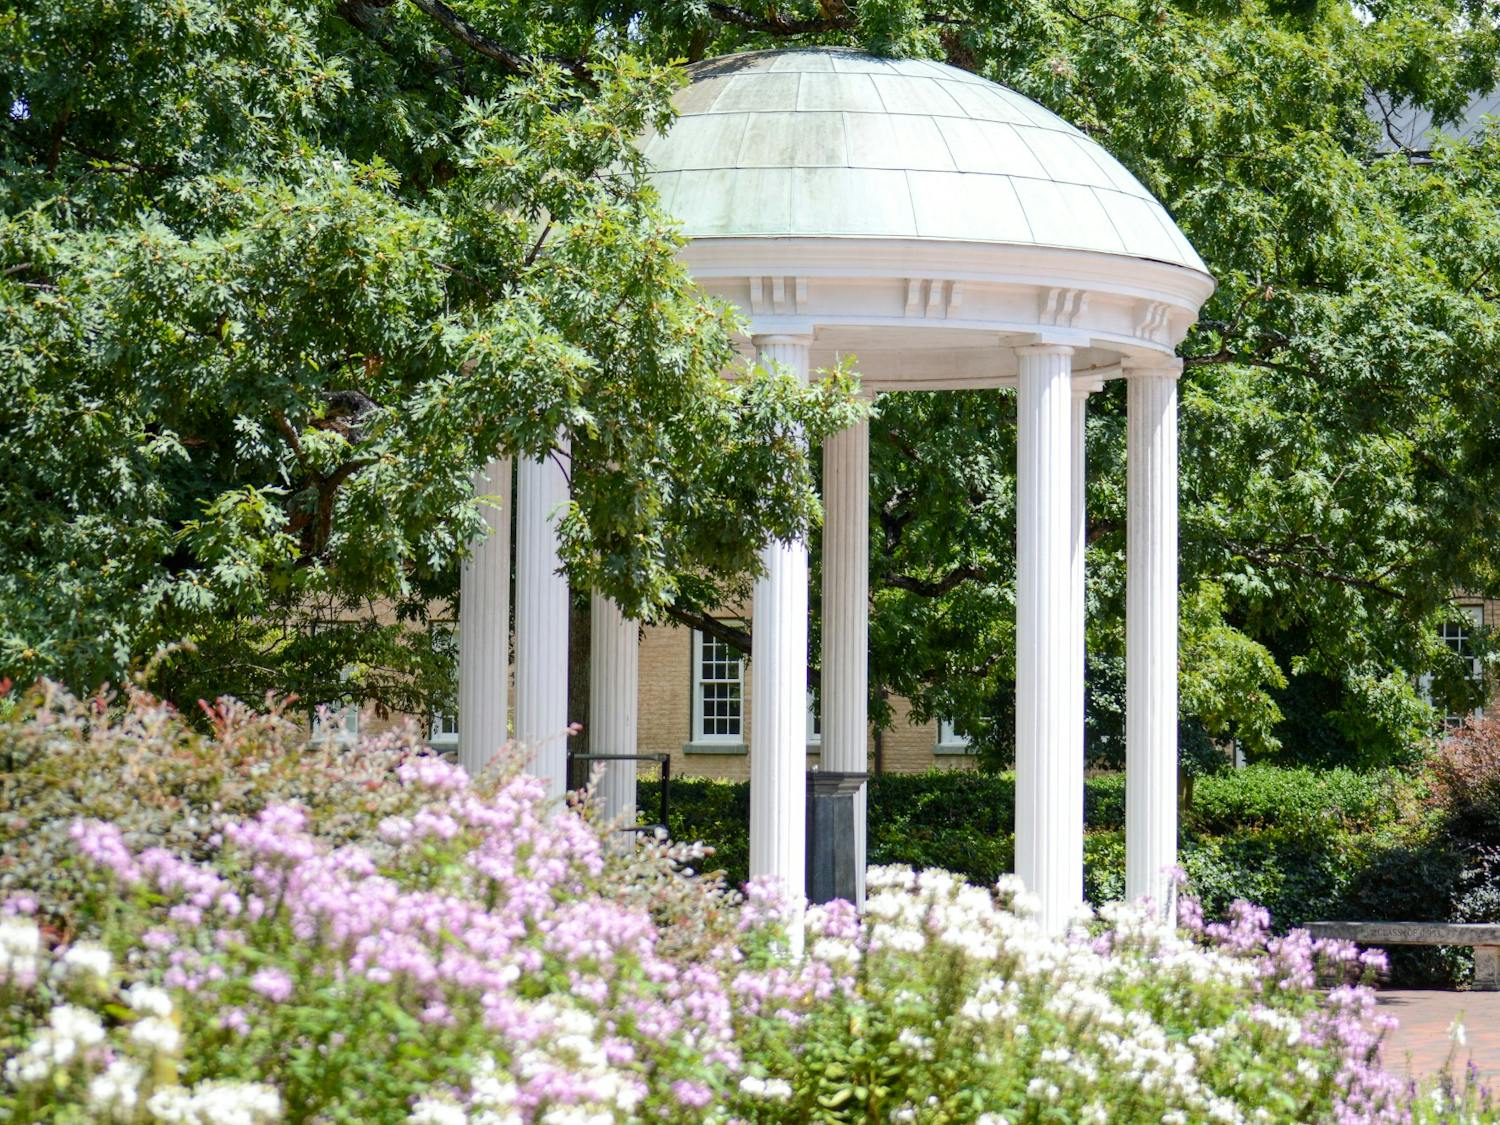 The Old Well, complimented by late summer flora, stands tall on Aug. 7, 2022.&nbsp;